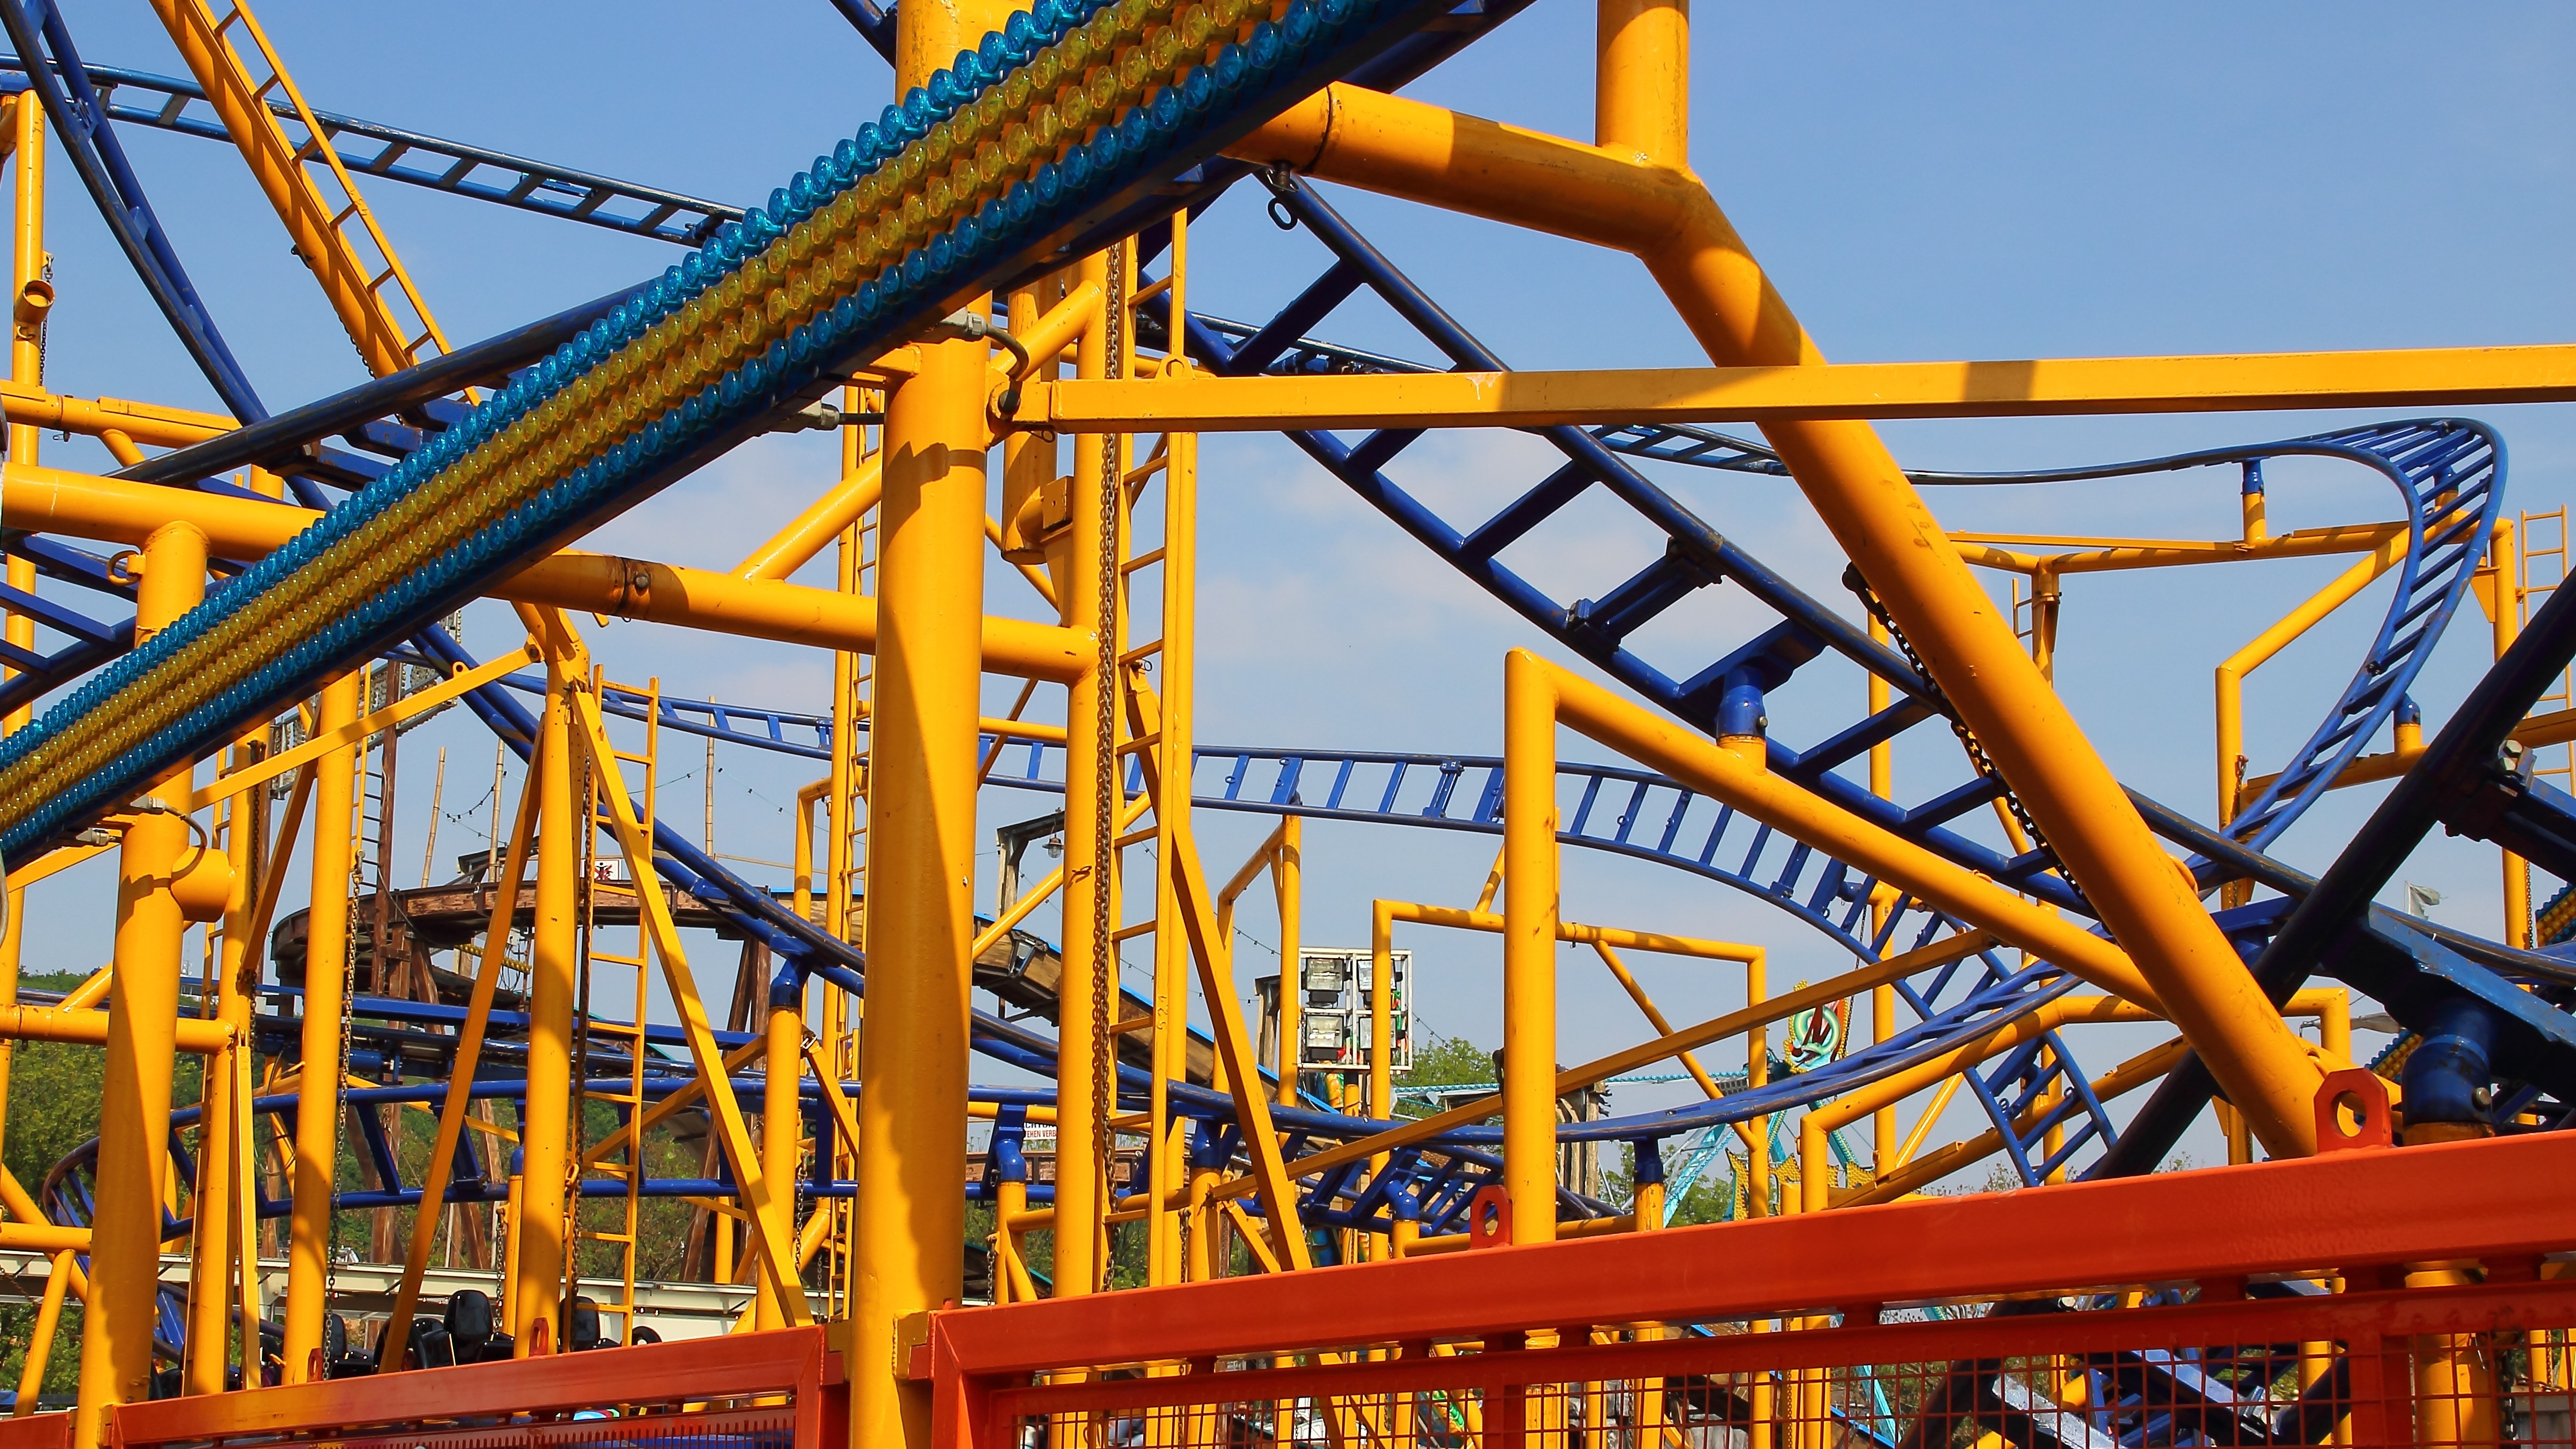 yellow and red steel  roller coaster